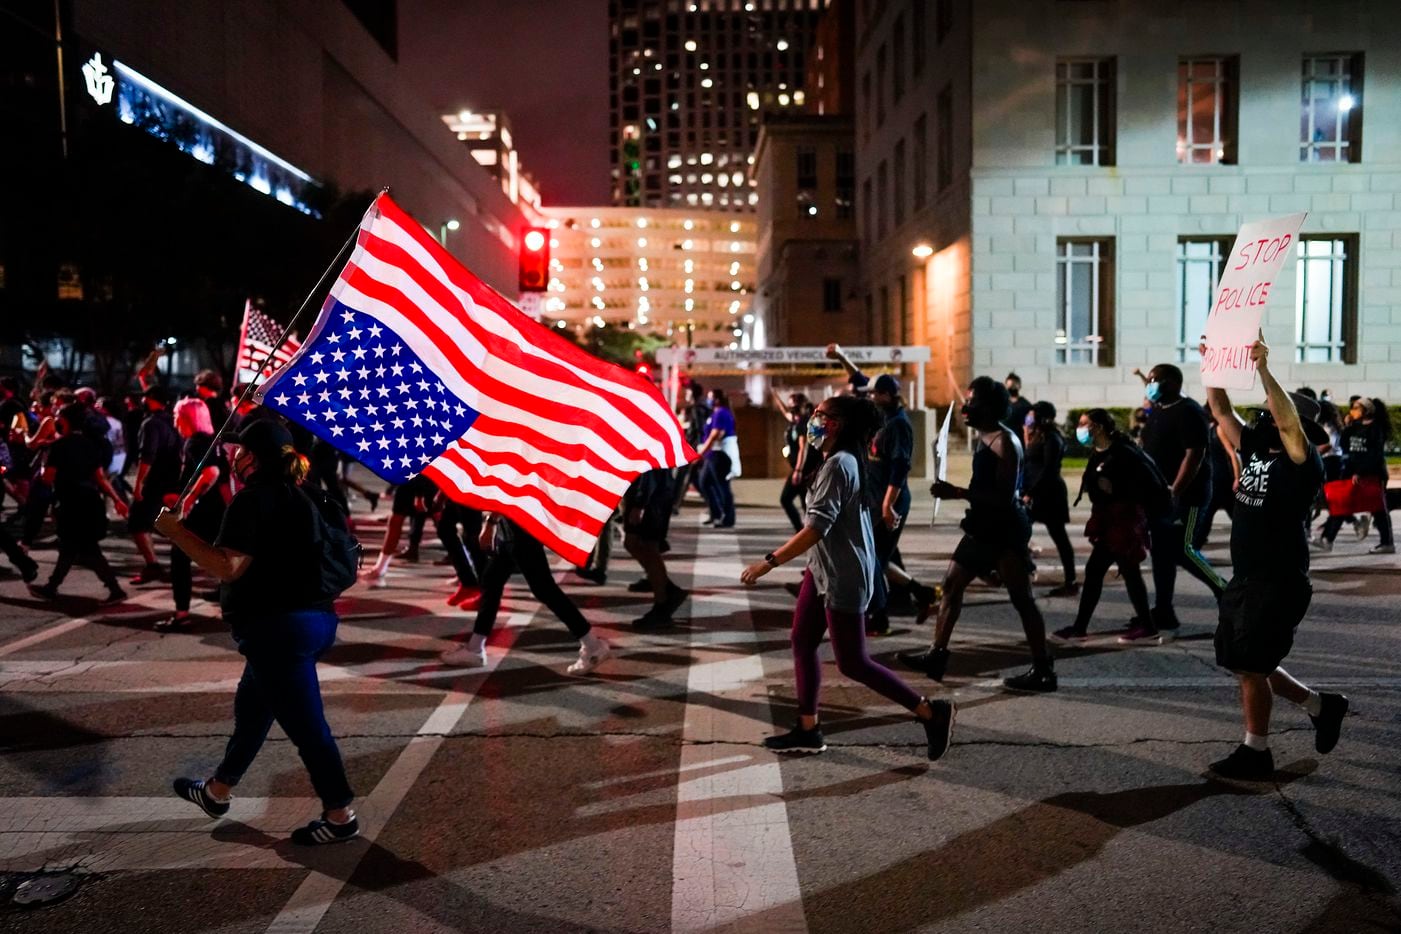 Demonstrators march on Ervay Street in downtown Dallas on Wednesday, Sept. 23, 2020. Protesters took to the streets around the country after a Kentucky grand jury brought no charges against Louisville police for the killing of Breonna Taylor.